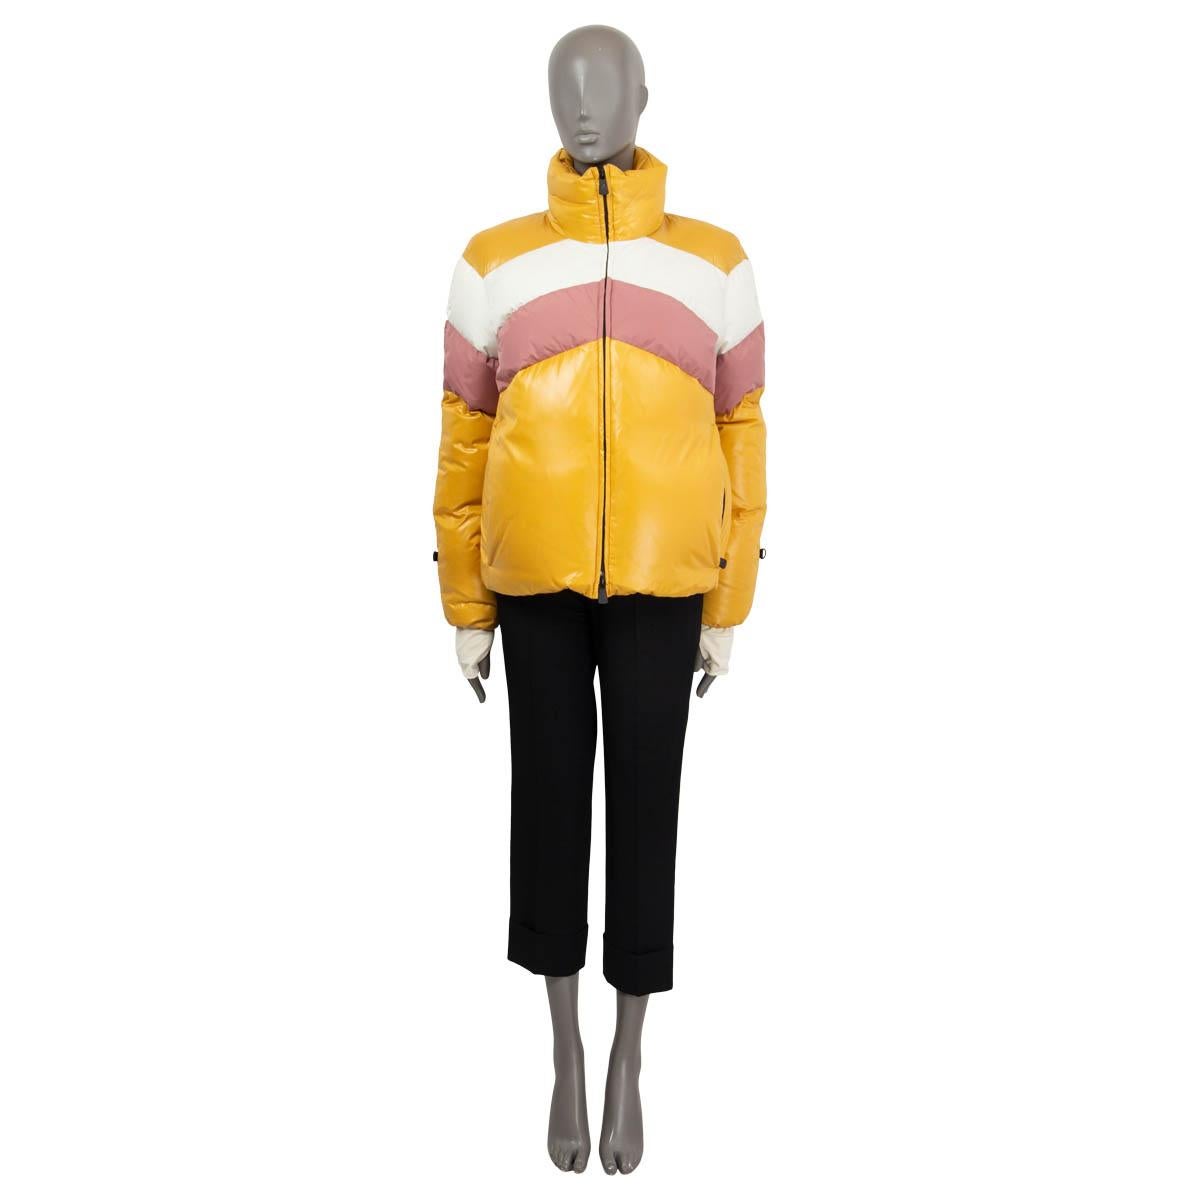 100% authentic Moncler Grenoble Lamar puffer down jacket in mustard ,white and pink nylon (100%). Features a stand collar with stowaway hood, zipper pockets and a ski pass pocket. Closes with a concealed water resistant two-way zipper. Lined